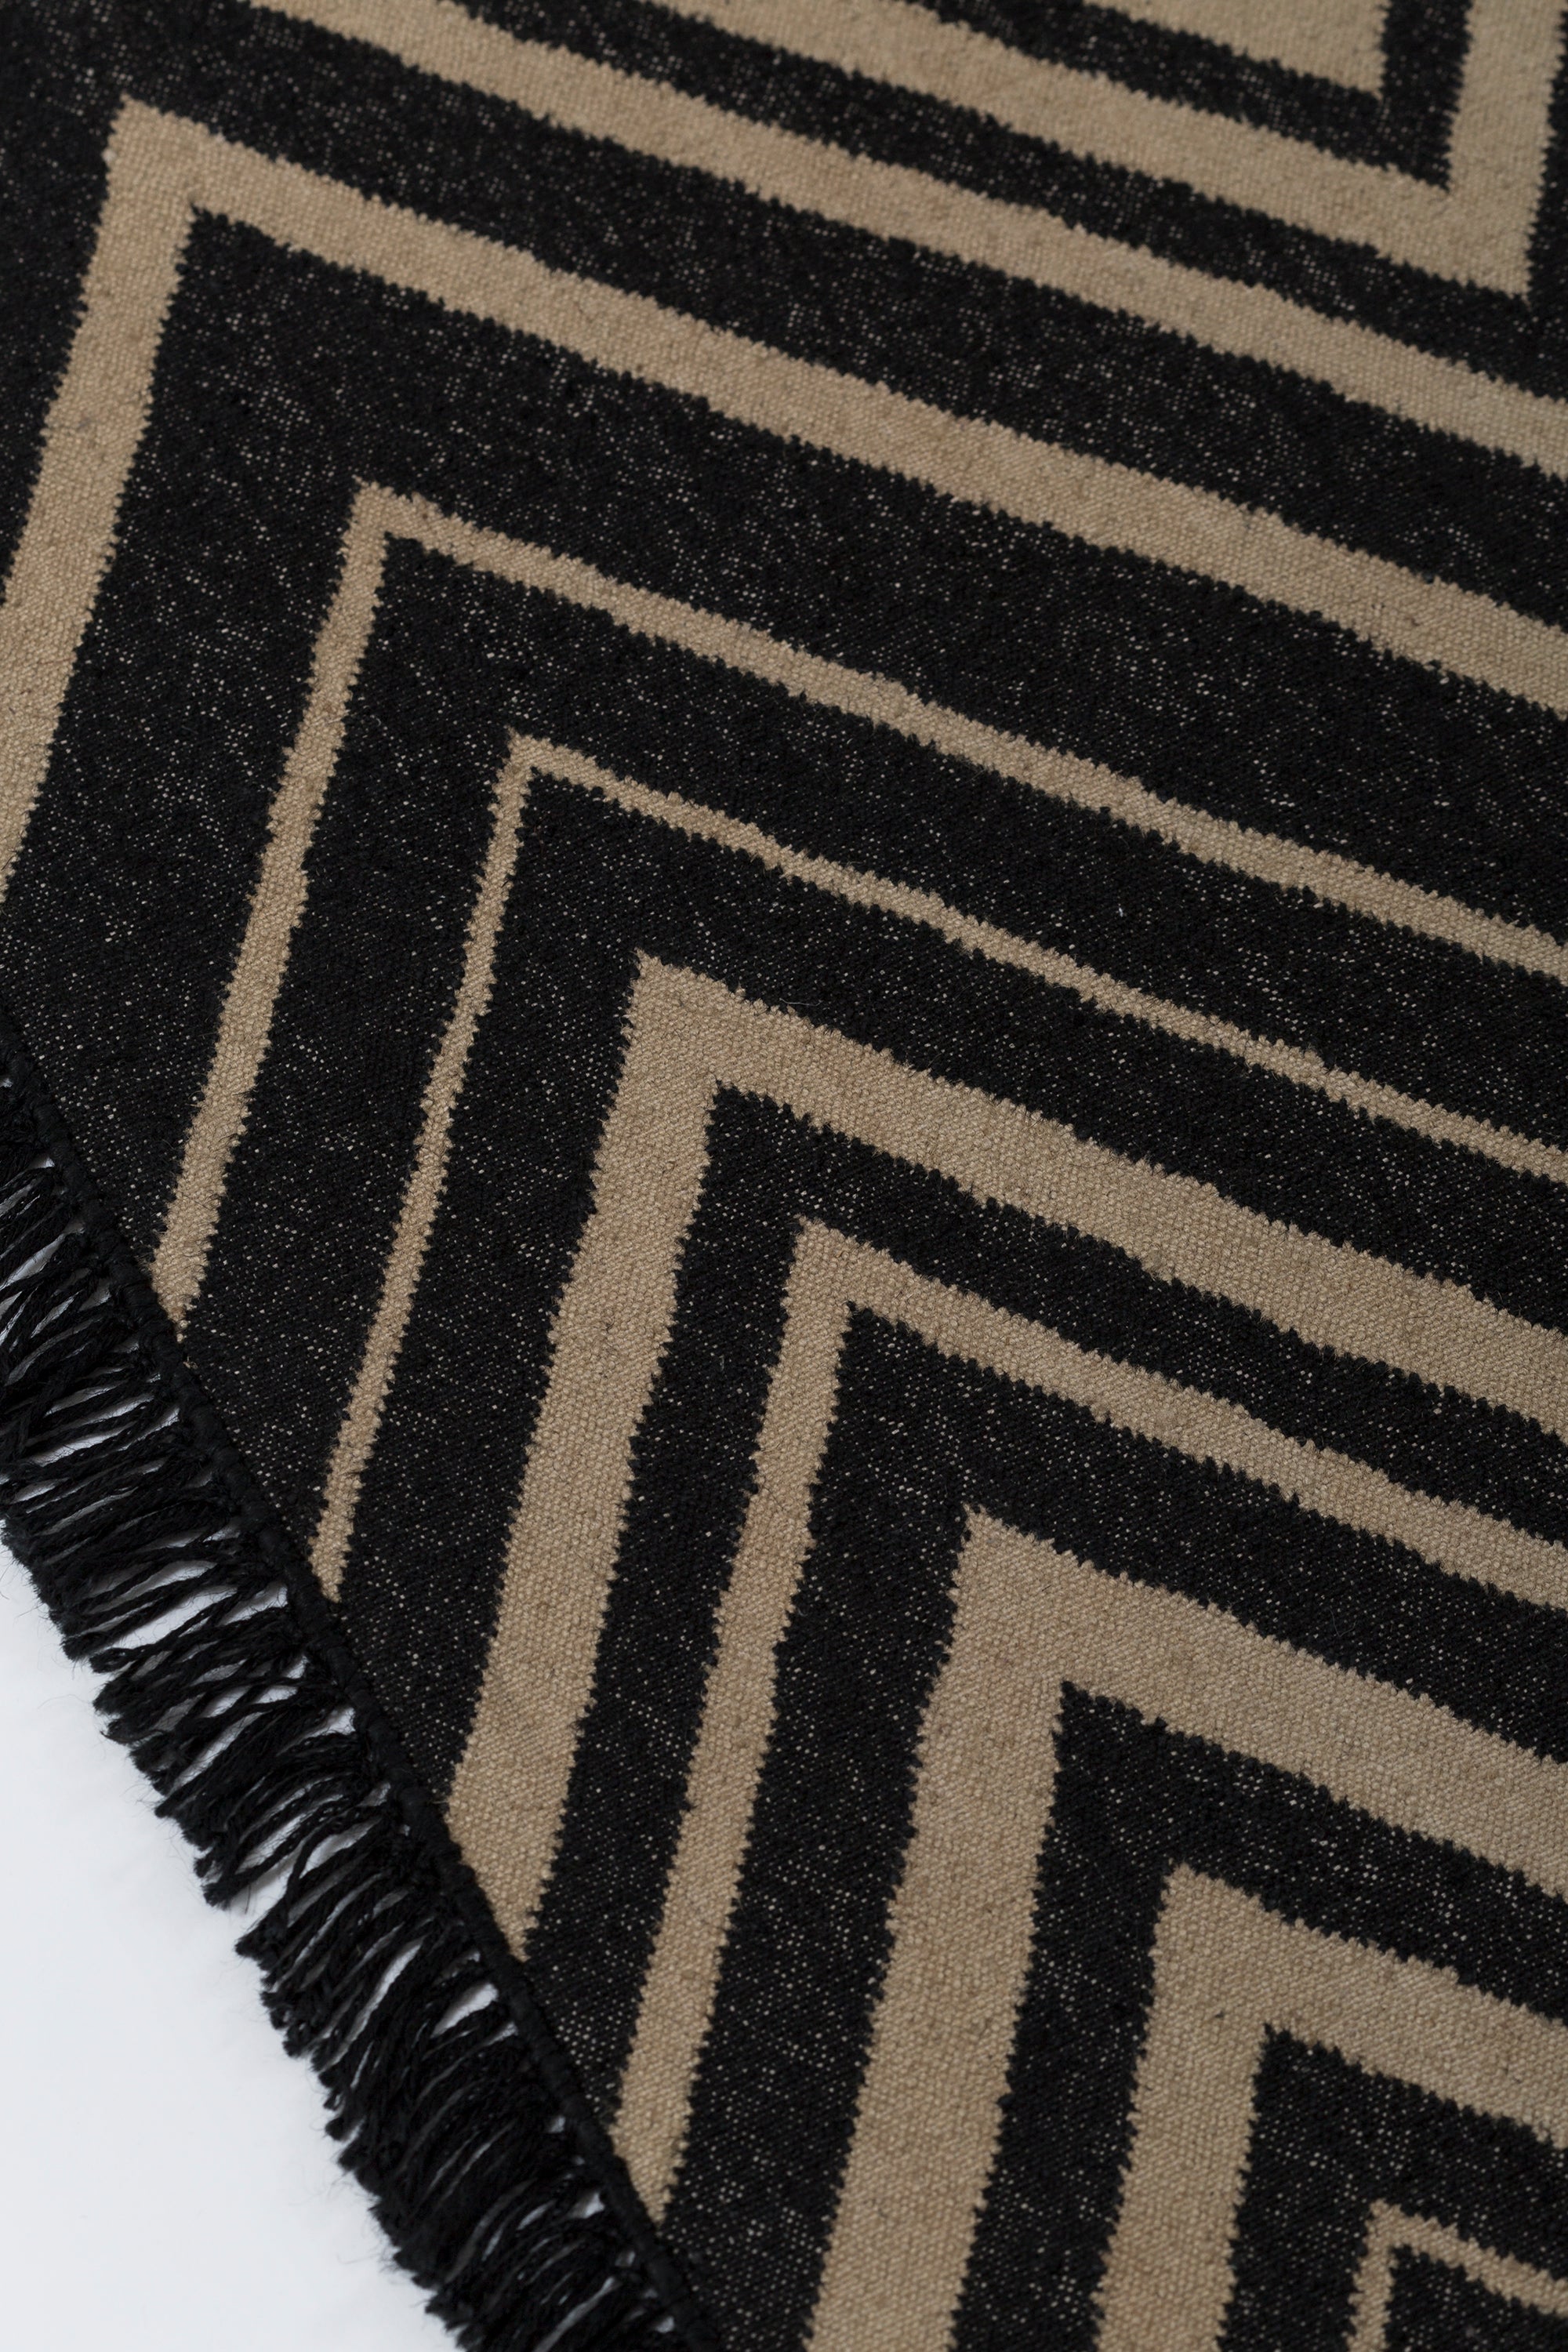 Detail of the Vertical Zig-Zag Rug in Onyx-Sandstone, a zig zag pattern in mixed widths in black and taupe with a fringed edge. 